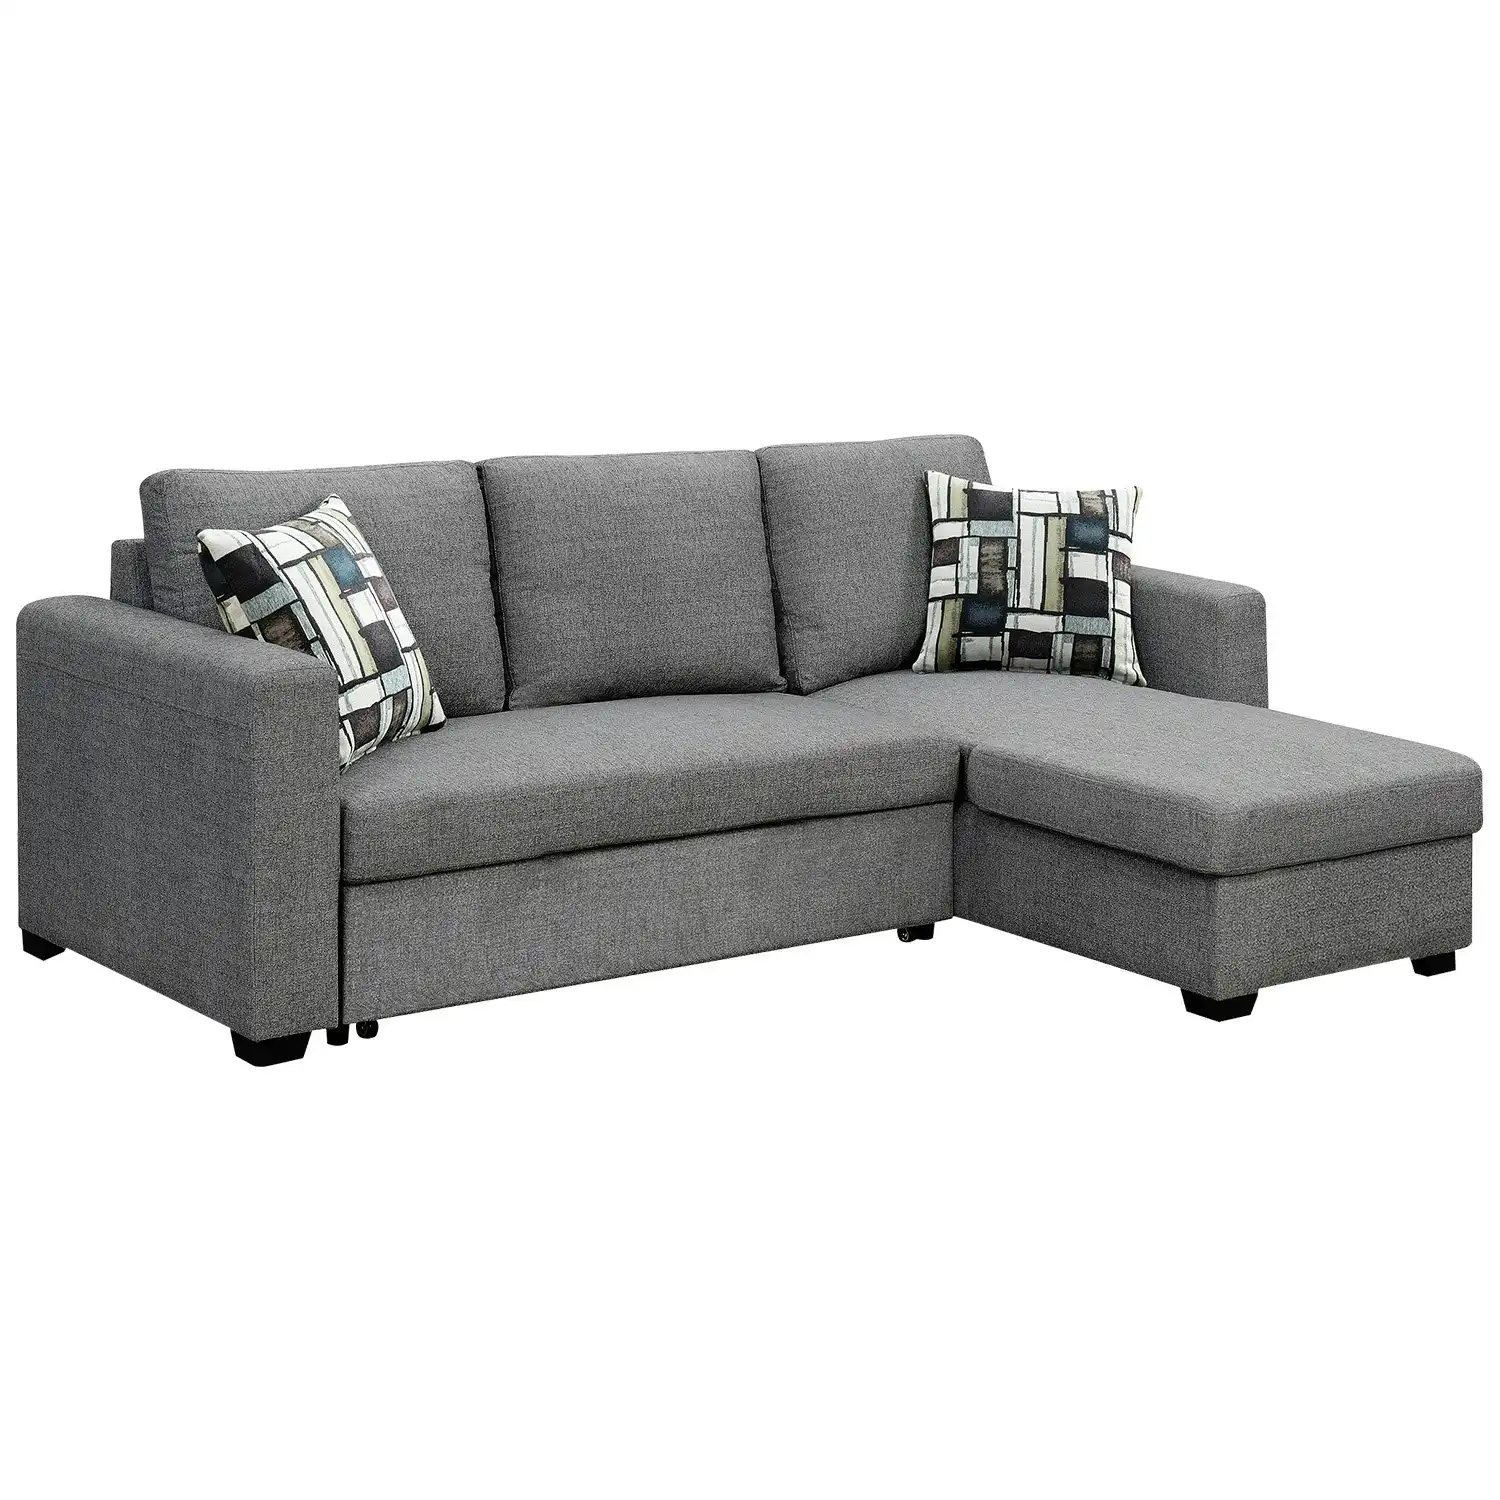 Fontana Grey Pullout Sofa Bed with Storage by Sarantino 3-Seater Corner Sofa Reversible Chaise Lounge